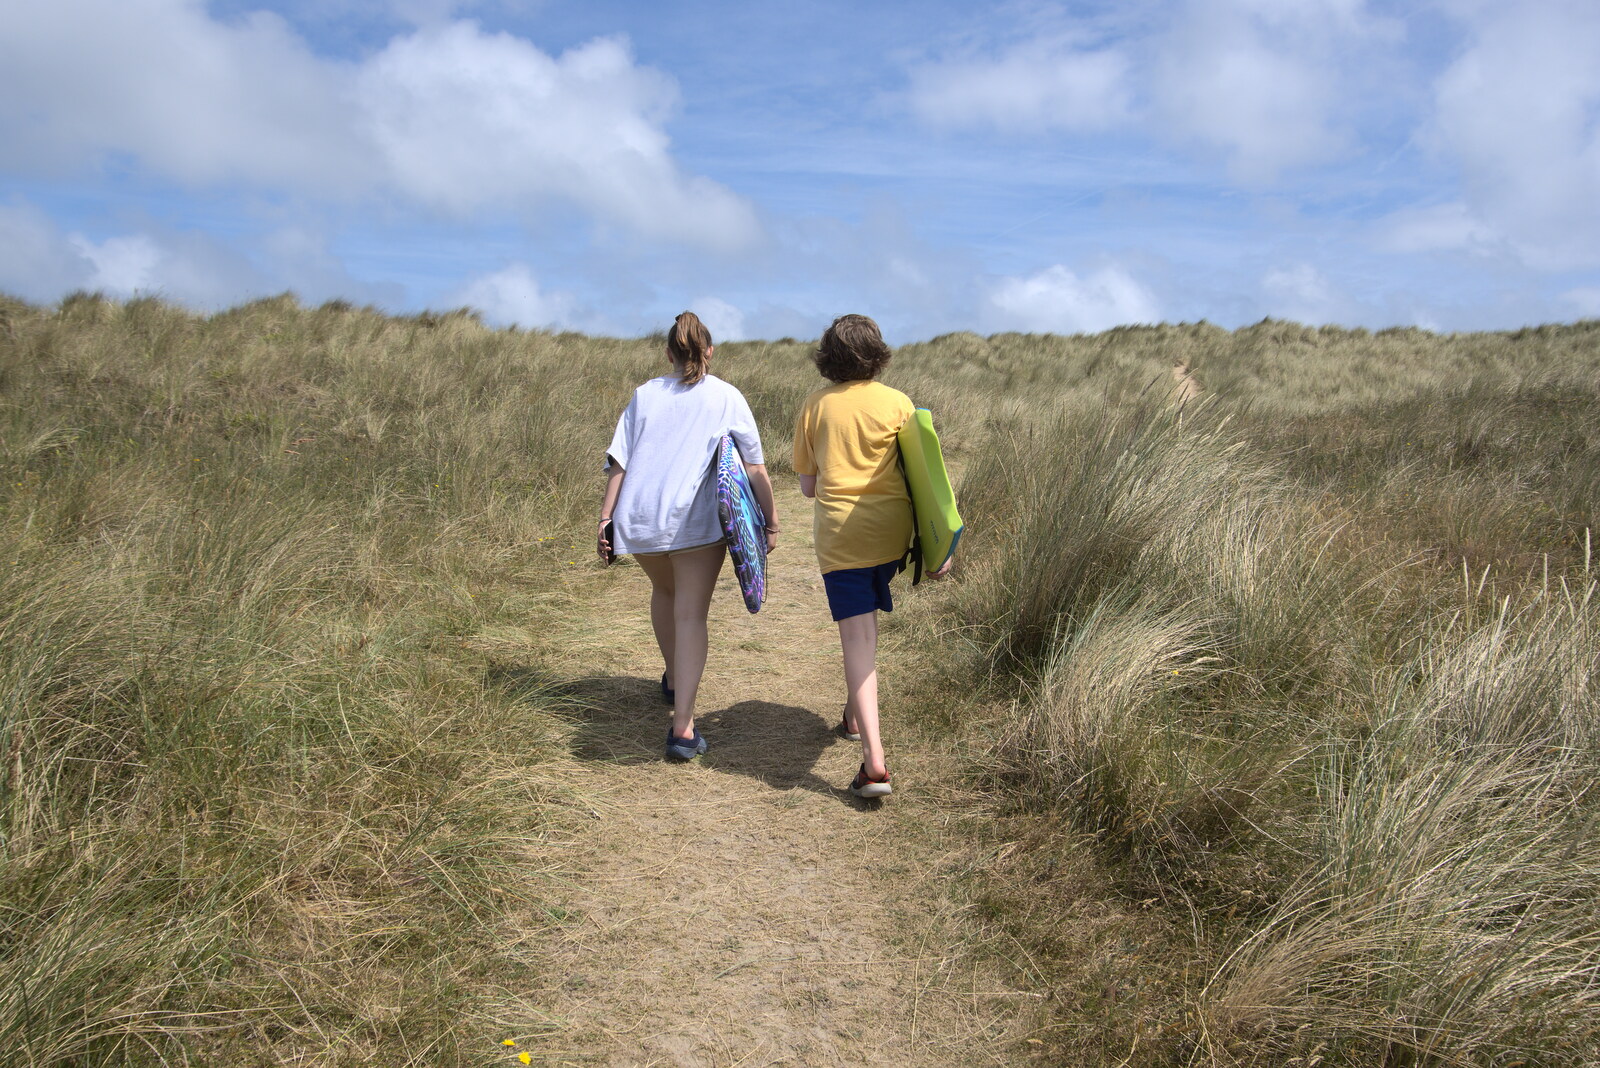 Sophie and Fred head off to the beach from Camping in the Dunes, Waxham Sands, Norfolk - 9th July 2022